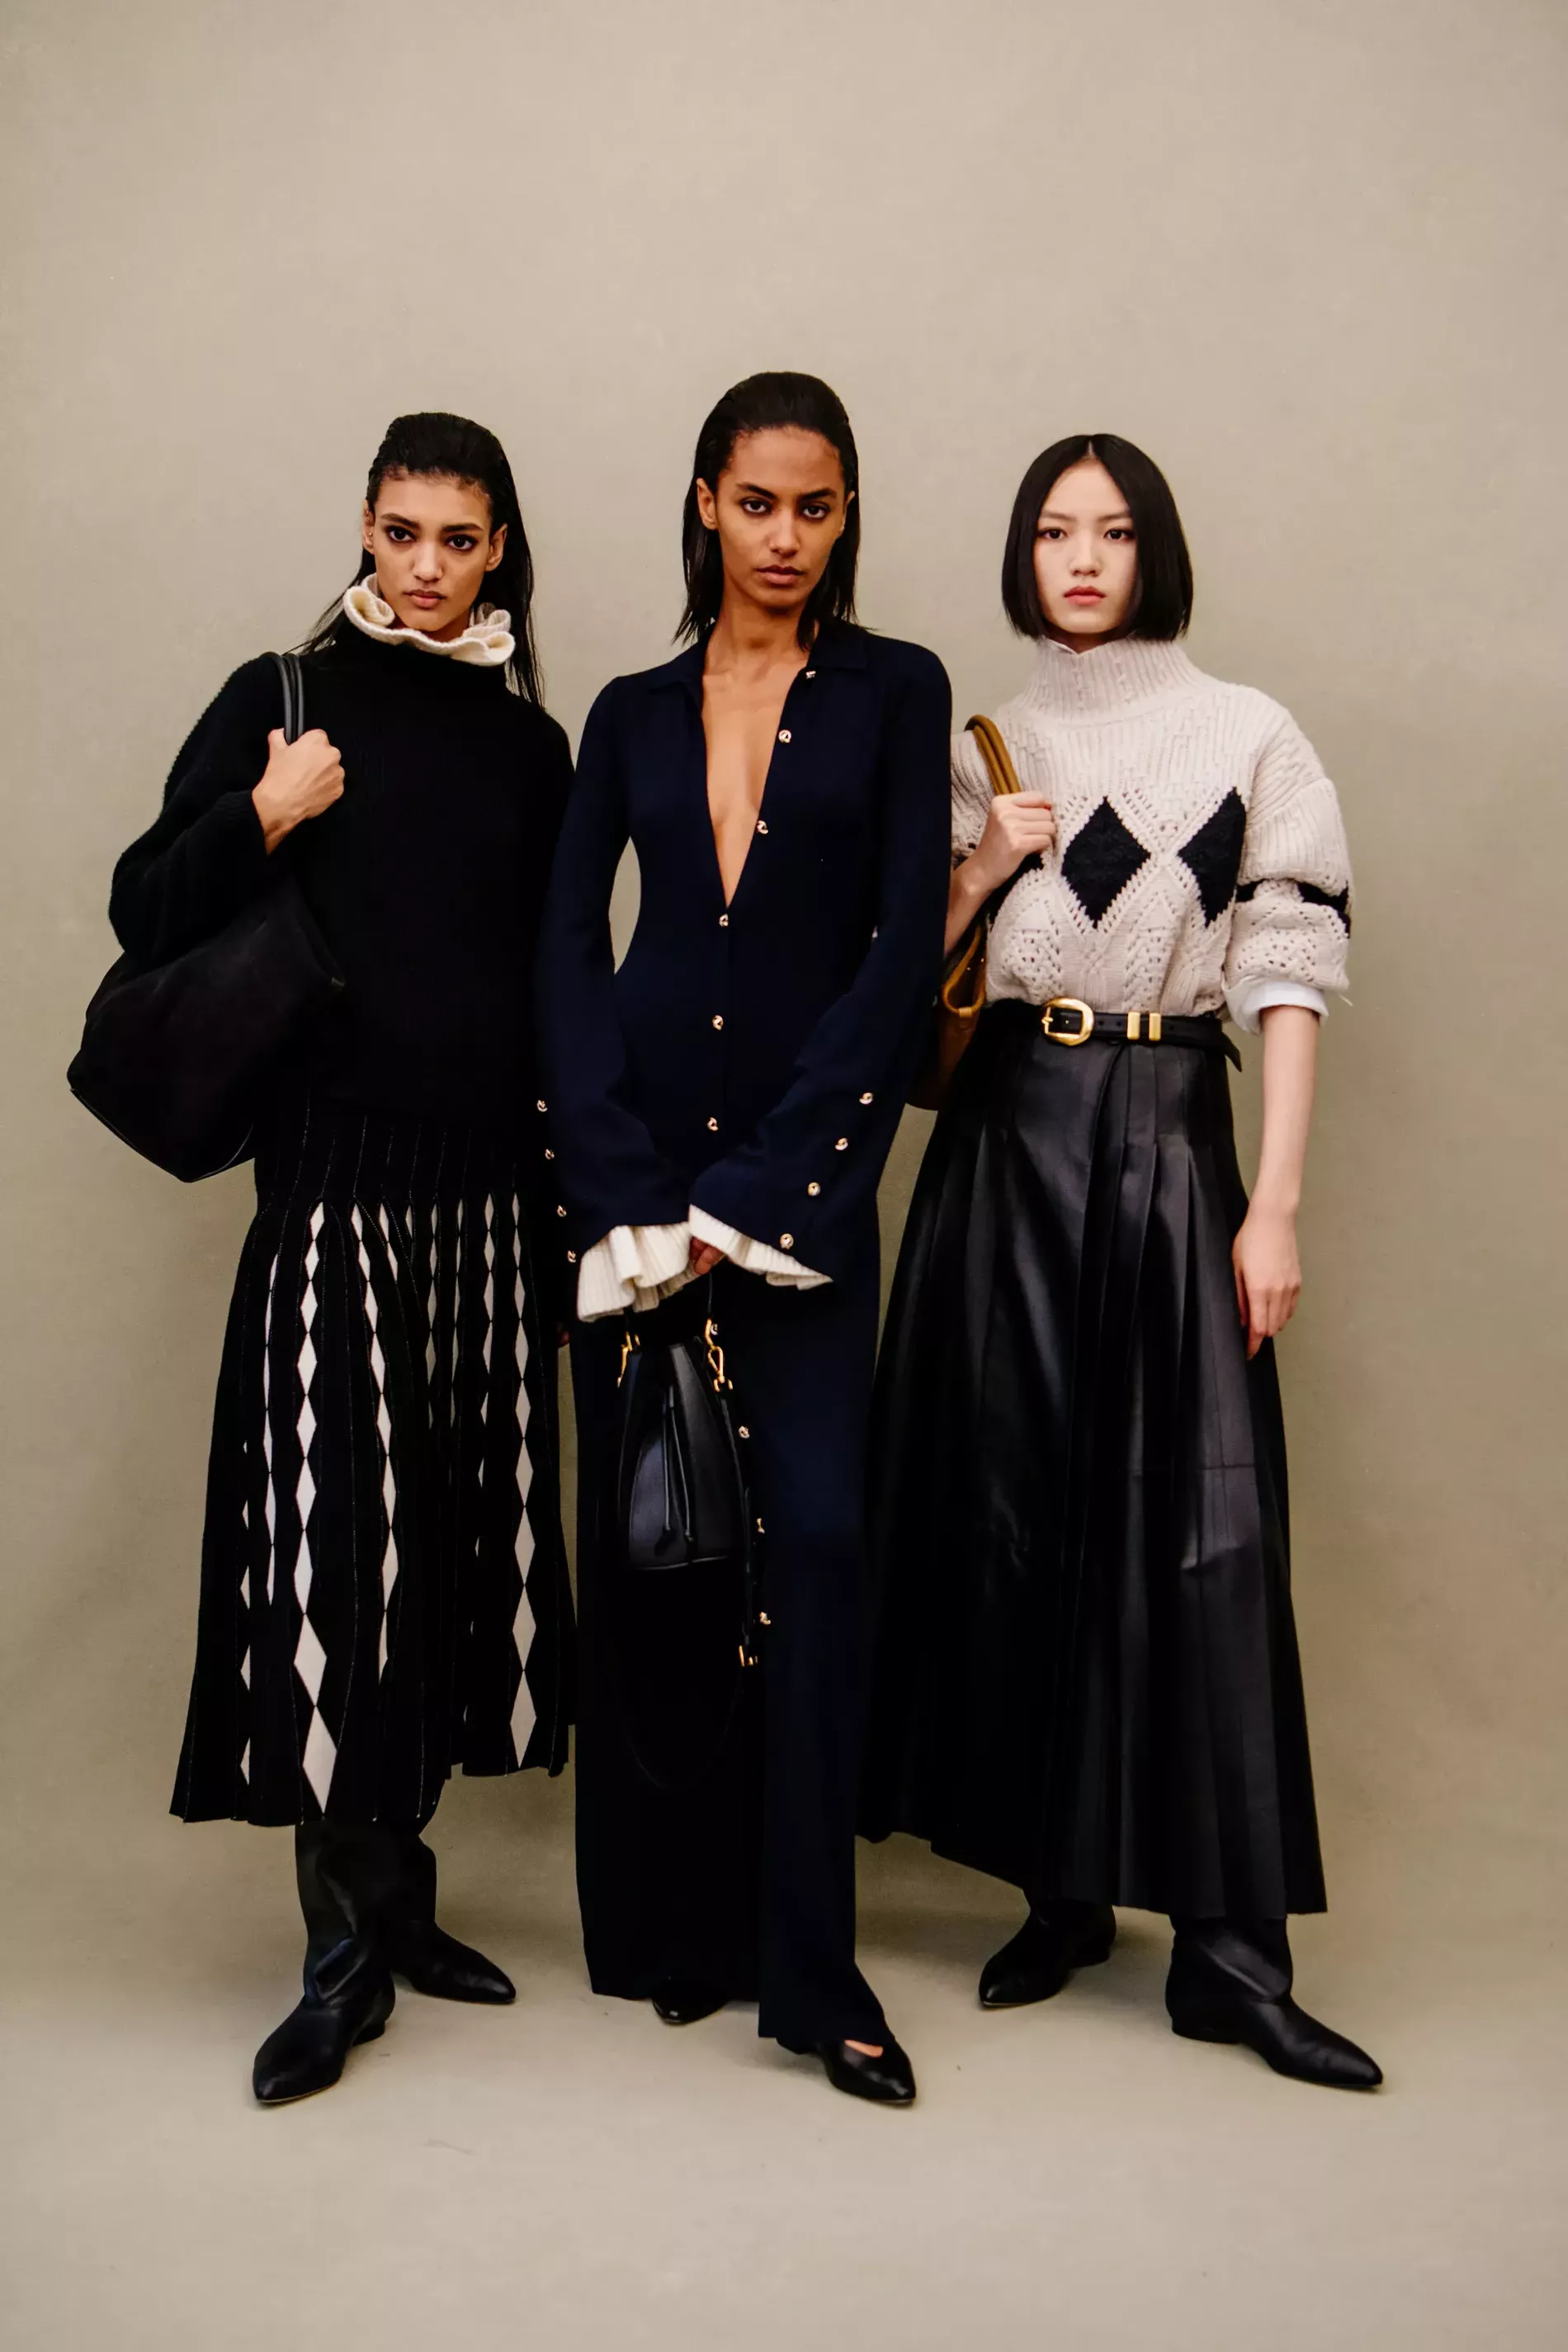 All the behind-the-scenes photos from NYFW you need to see - Vogue ...